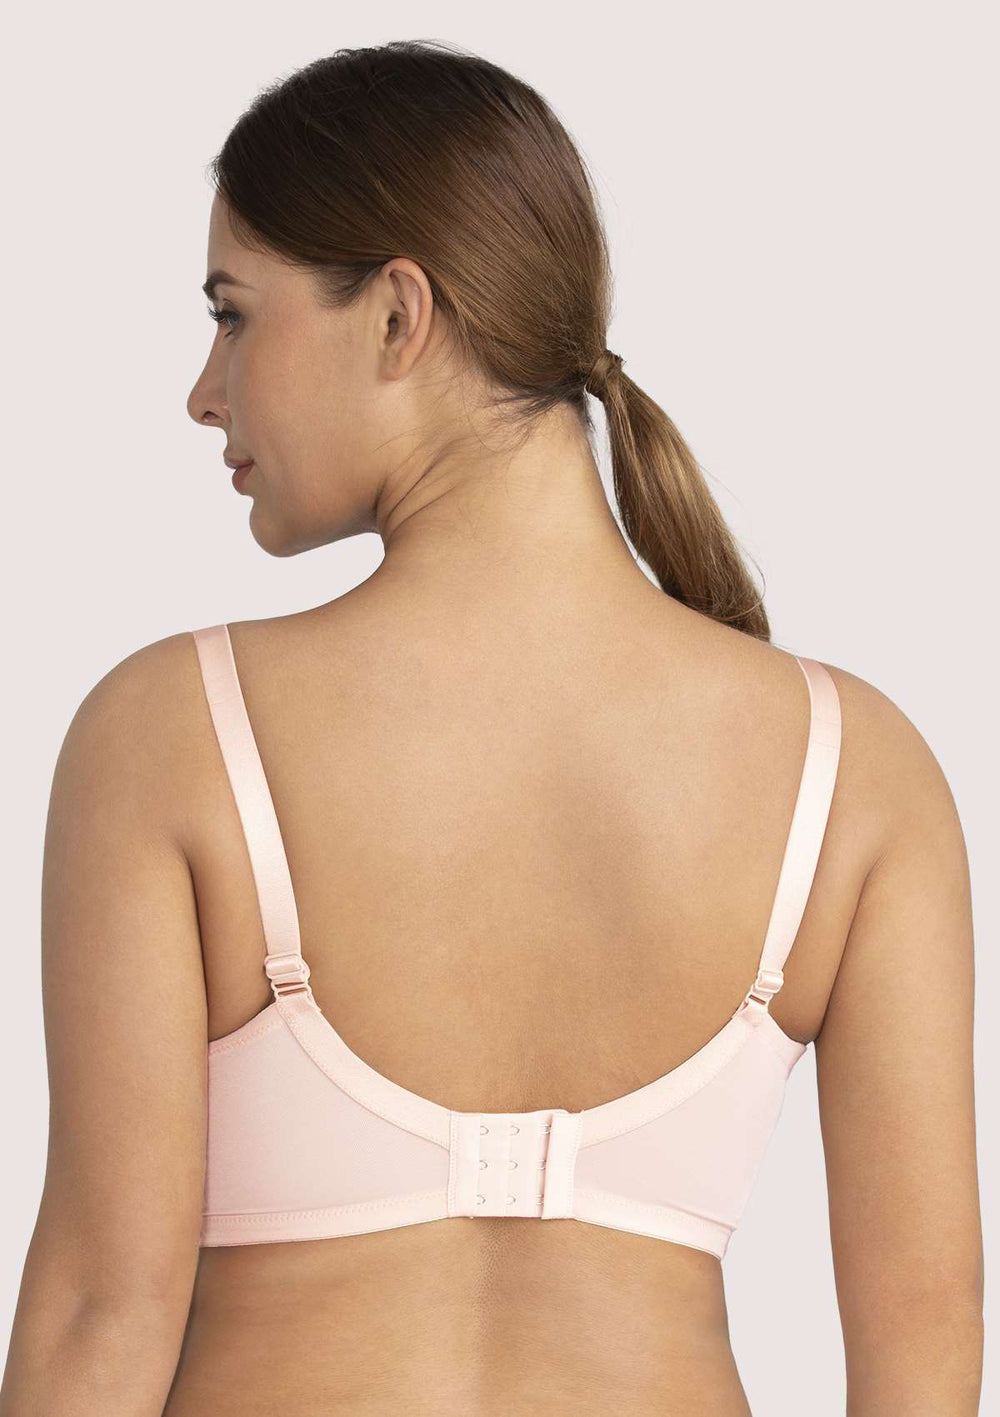 Bras for Narrow Shoulders: Finding Styles that Stay in Place, by Hsia  Lingerie